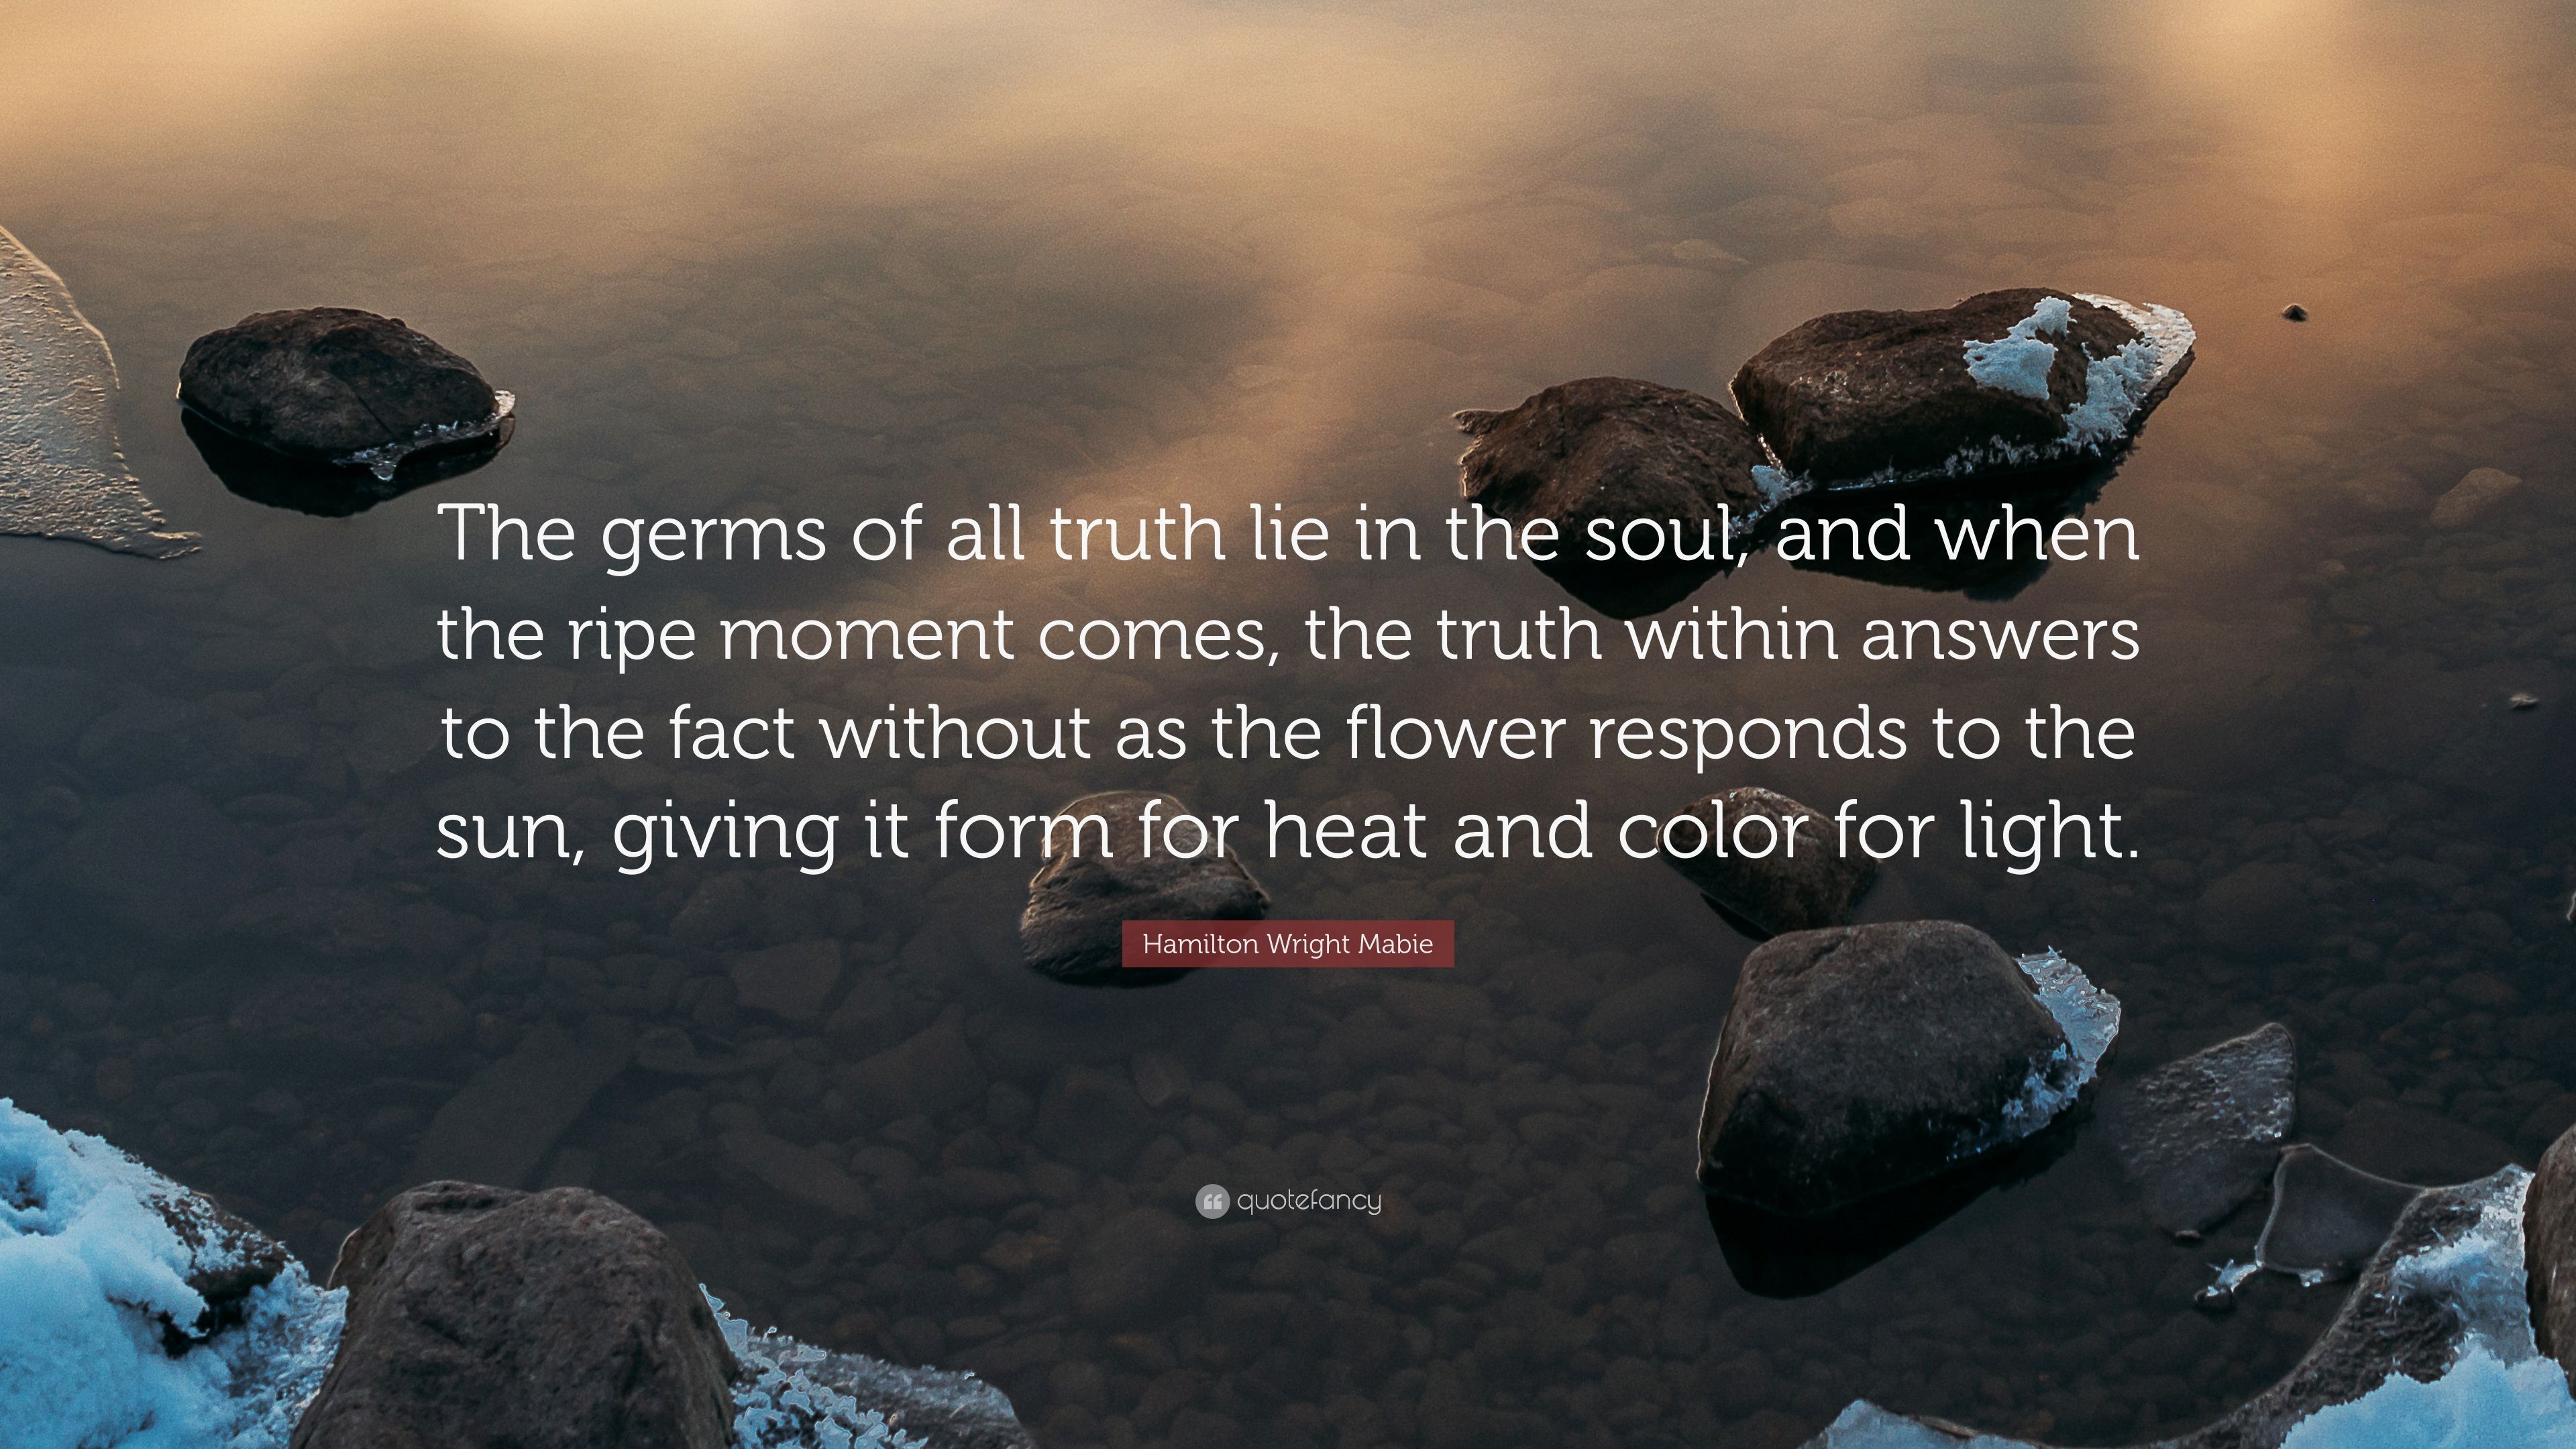 Hamilton Wright Mabie Quote: “The germs of all truth lie in